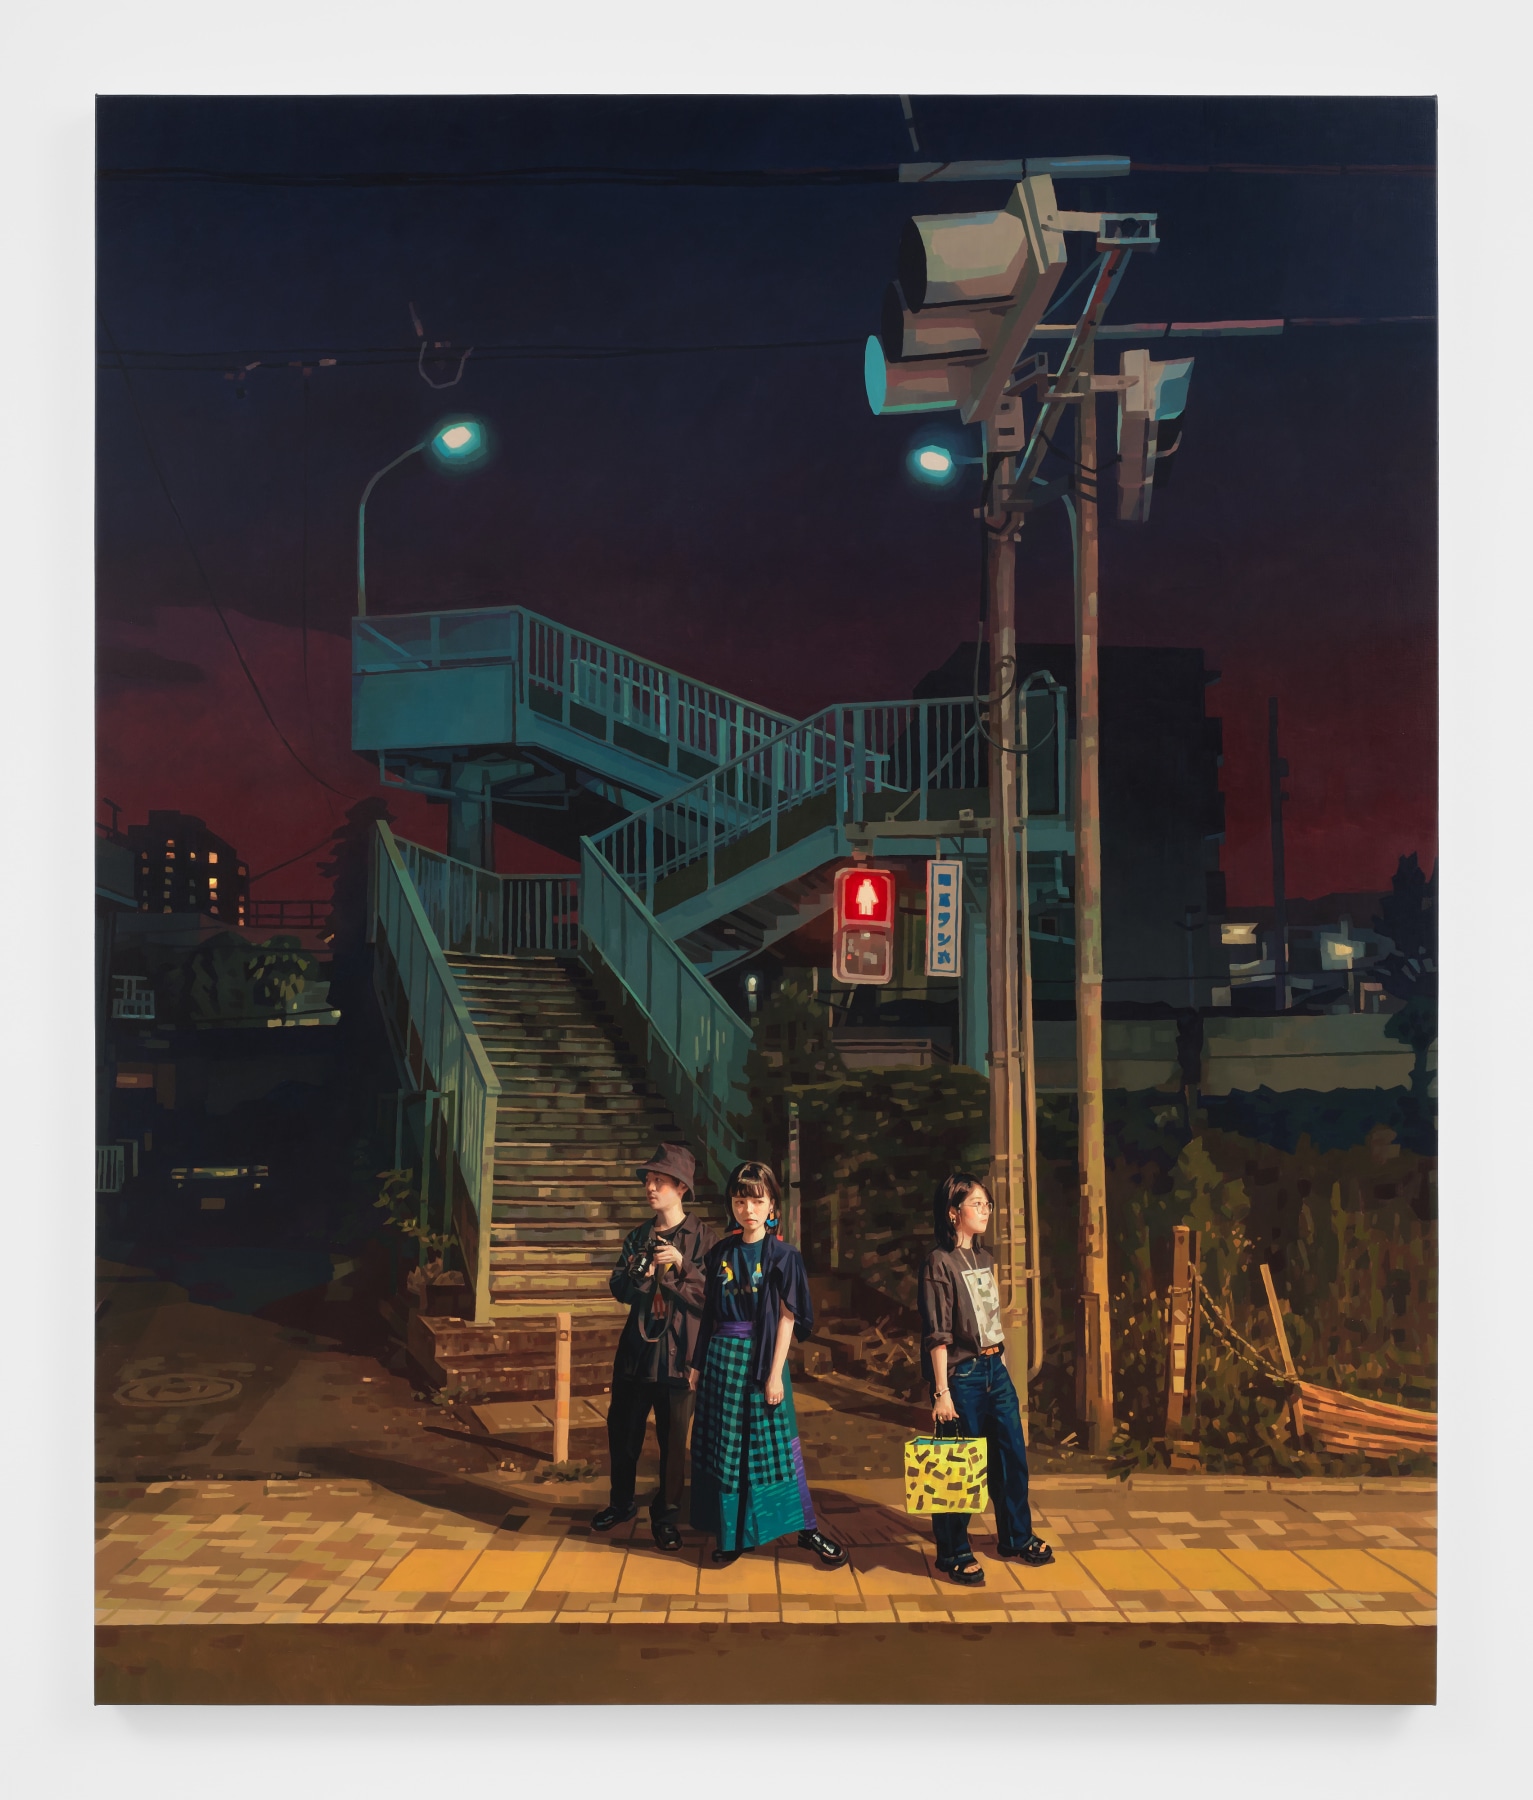 A painting of three people waiting for a crosswalk signal in an urban setting at night.